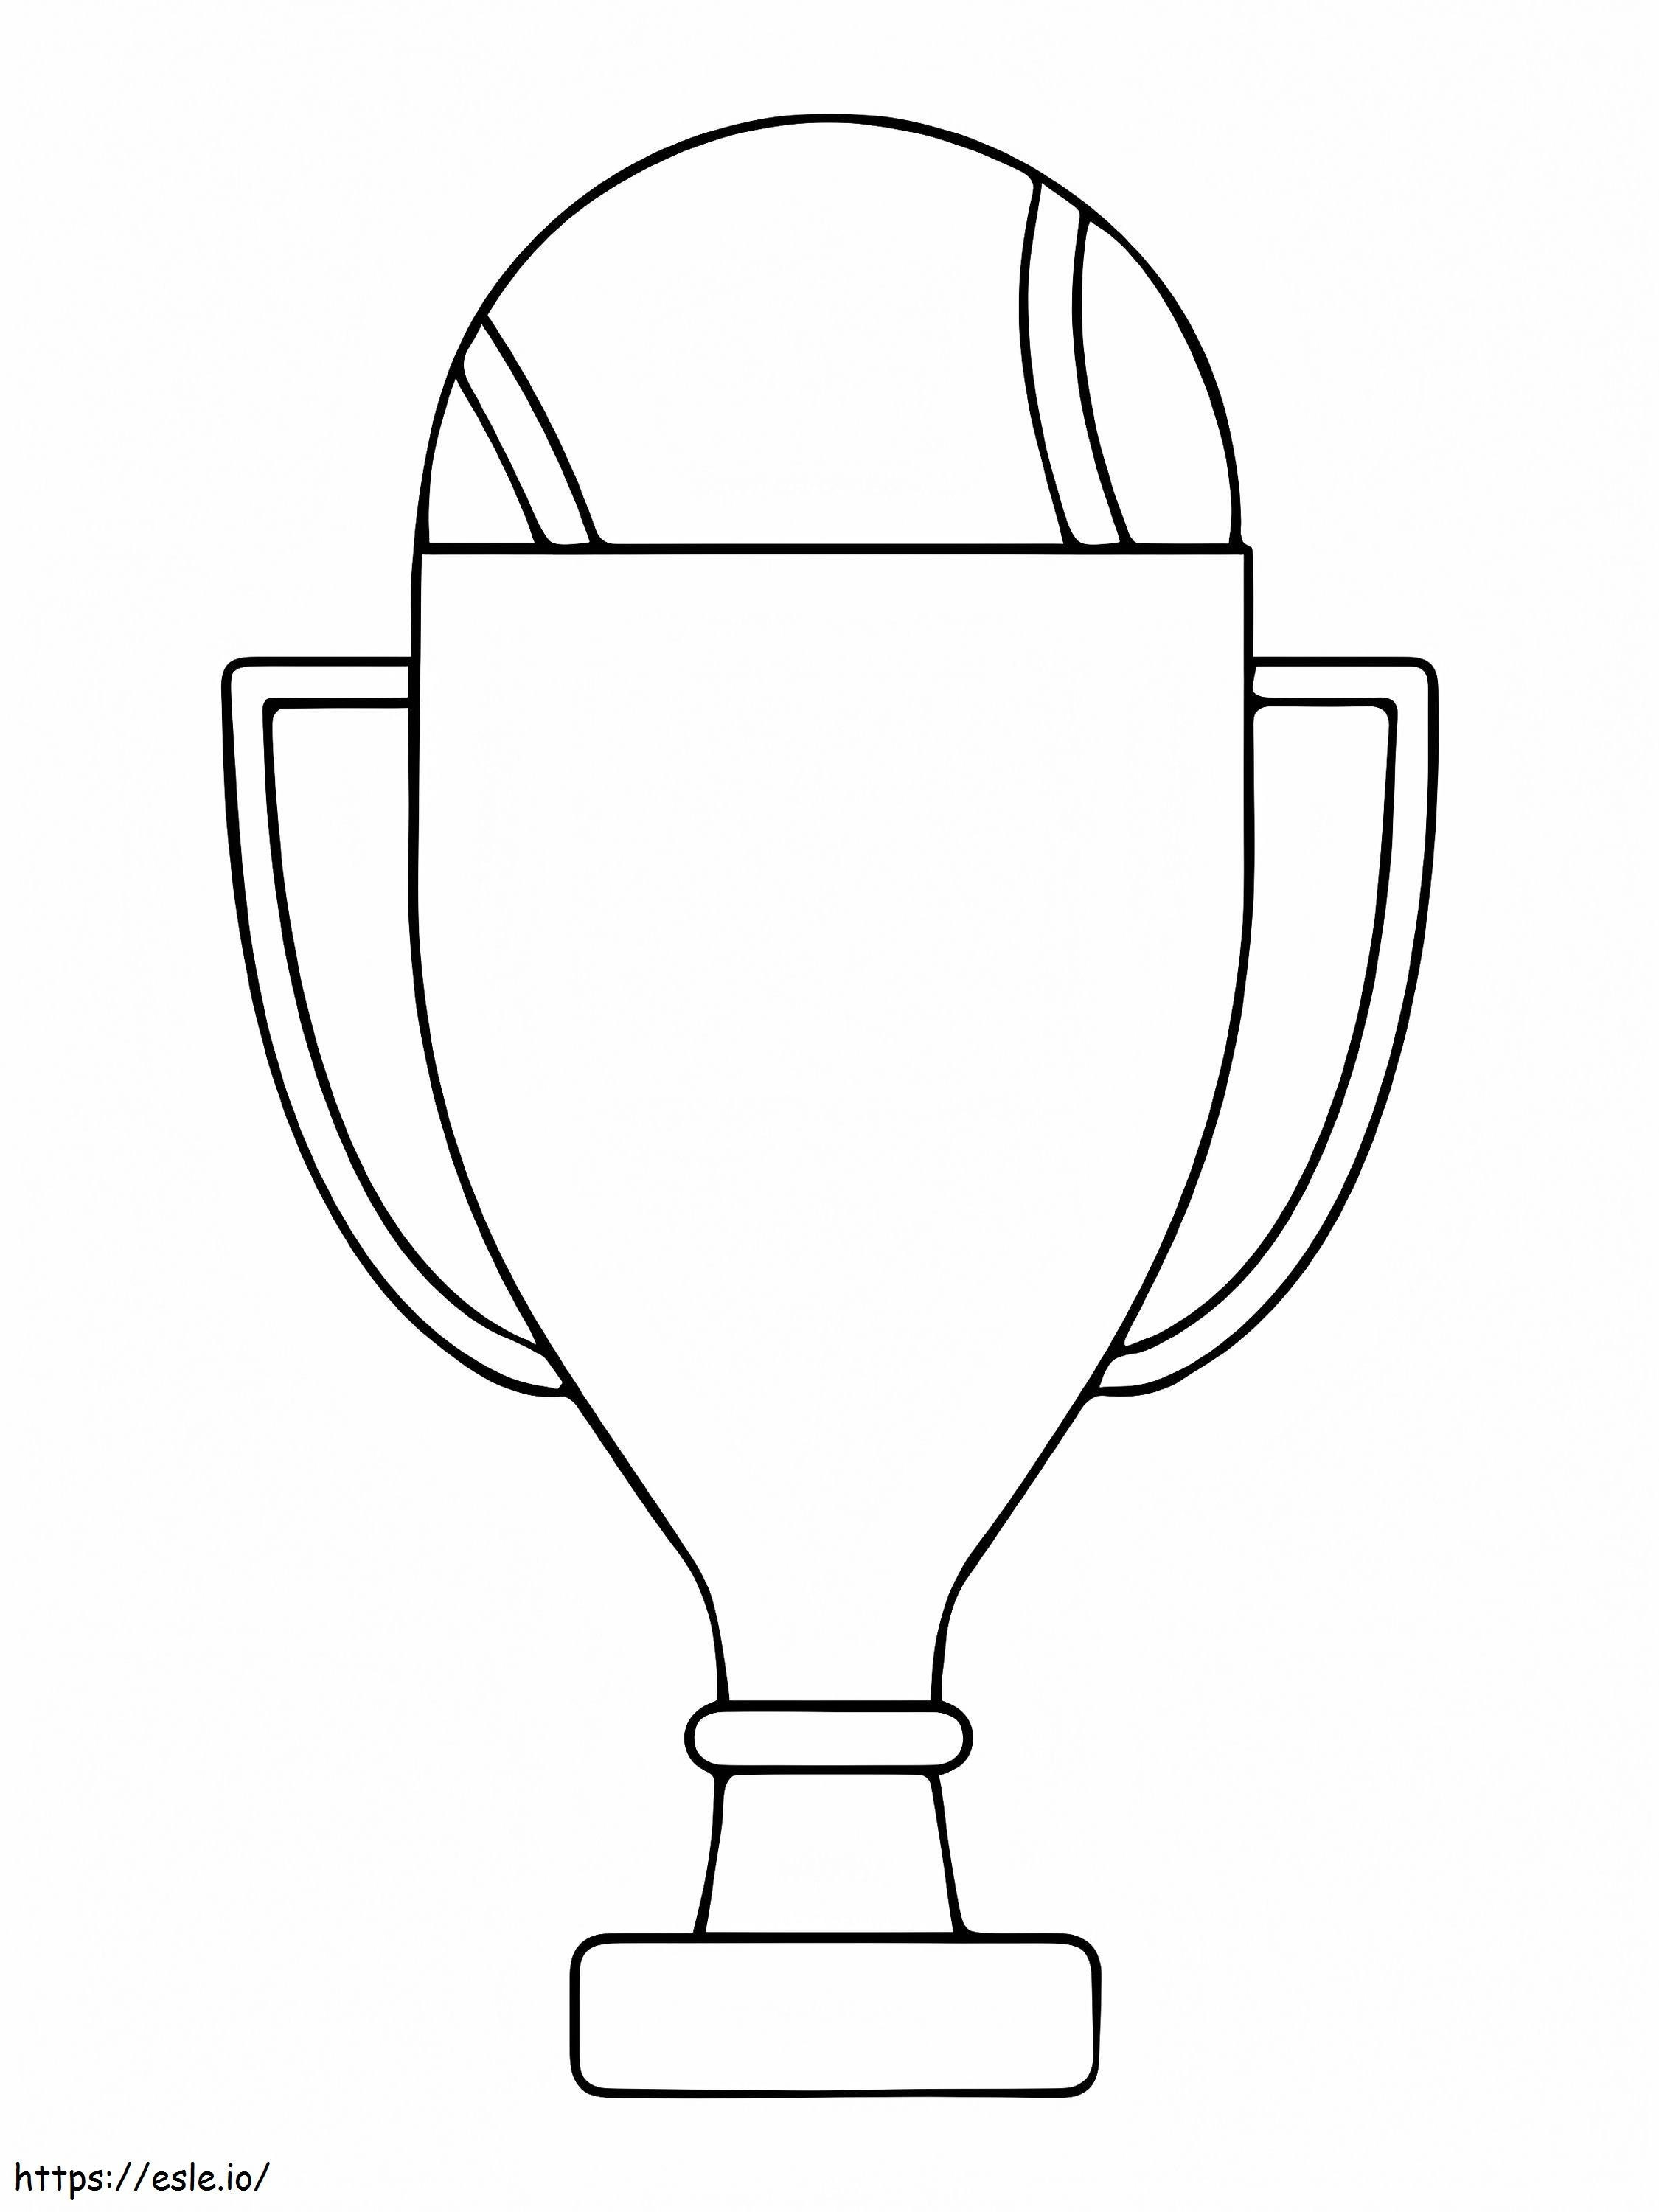 World Cup Trophy 2 coloring page